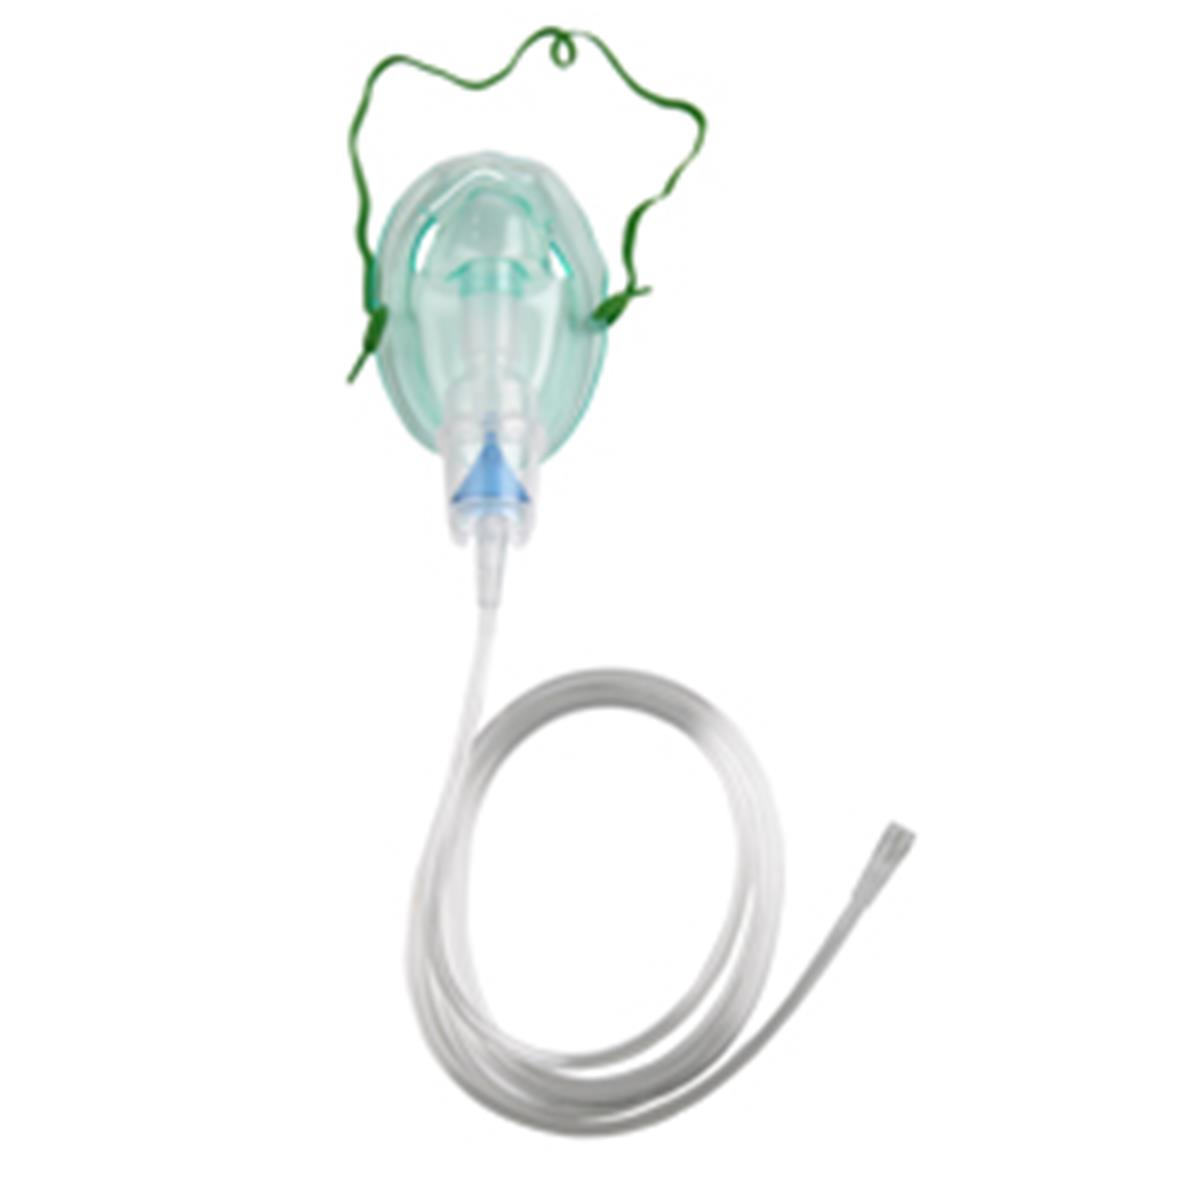 Picture of Current Solutions NEB-ADLTM Nebulizer Kit with Adult Mask